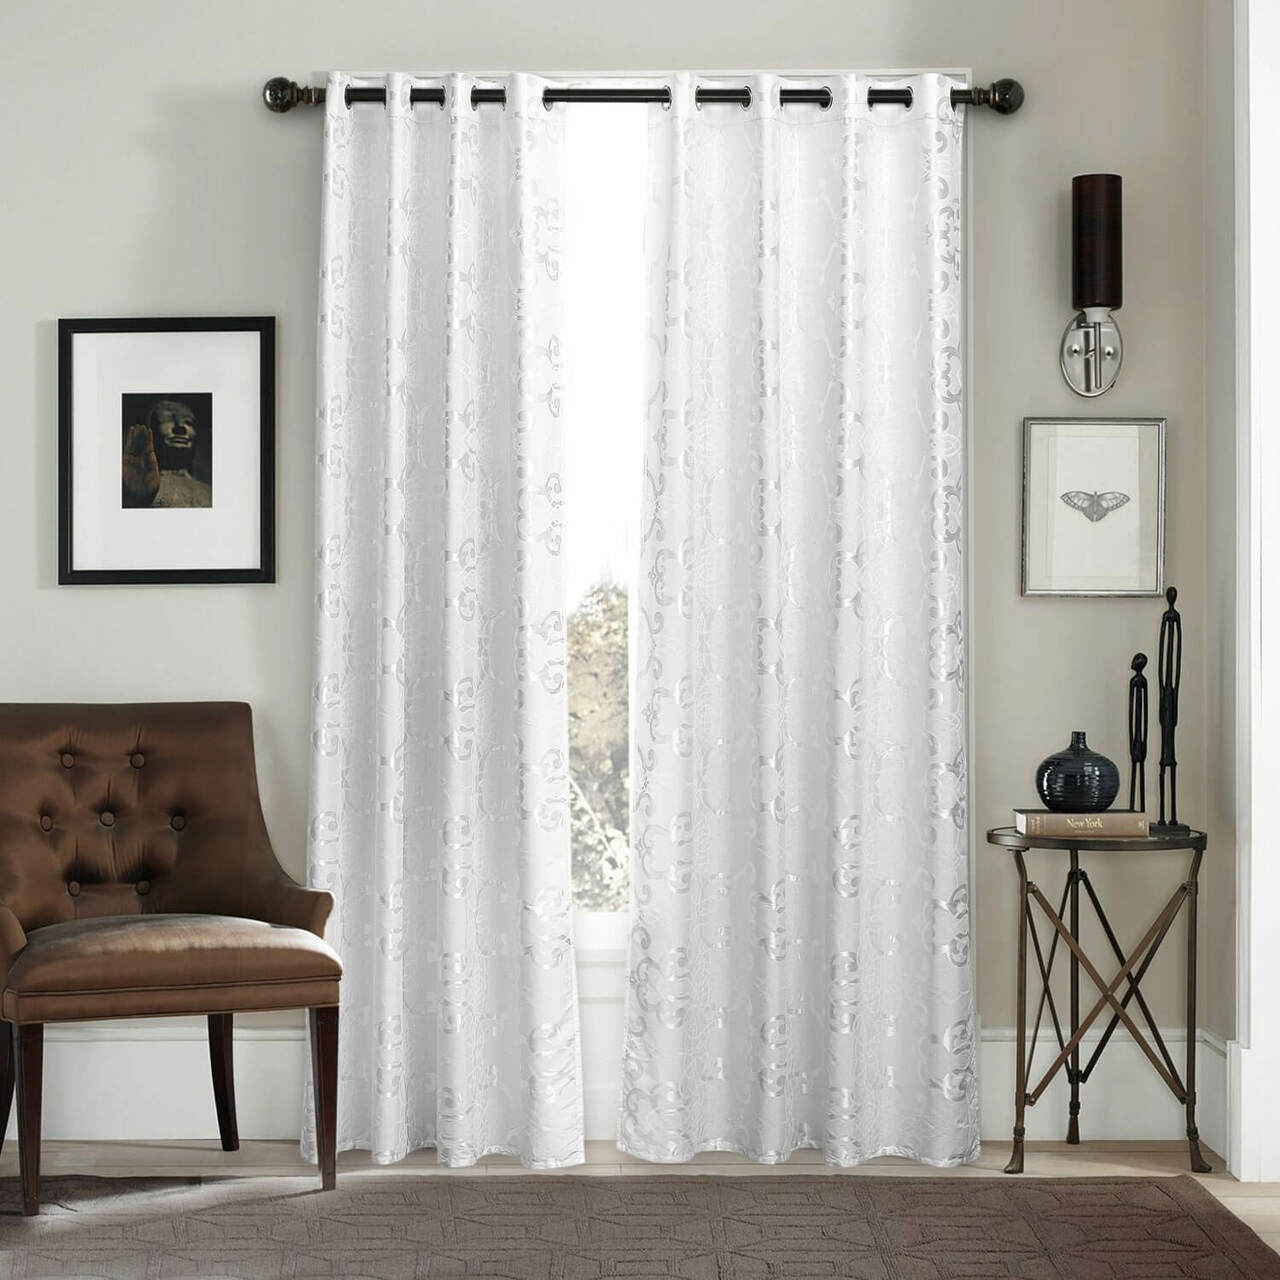 Dolce Mela White Curtains Damask Jacquard, Grommet, Semi-Blackout, Tall 60x100 inches